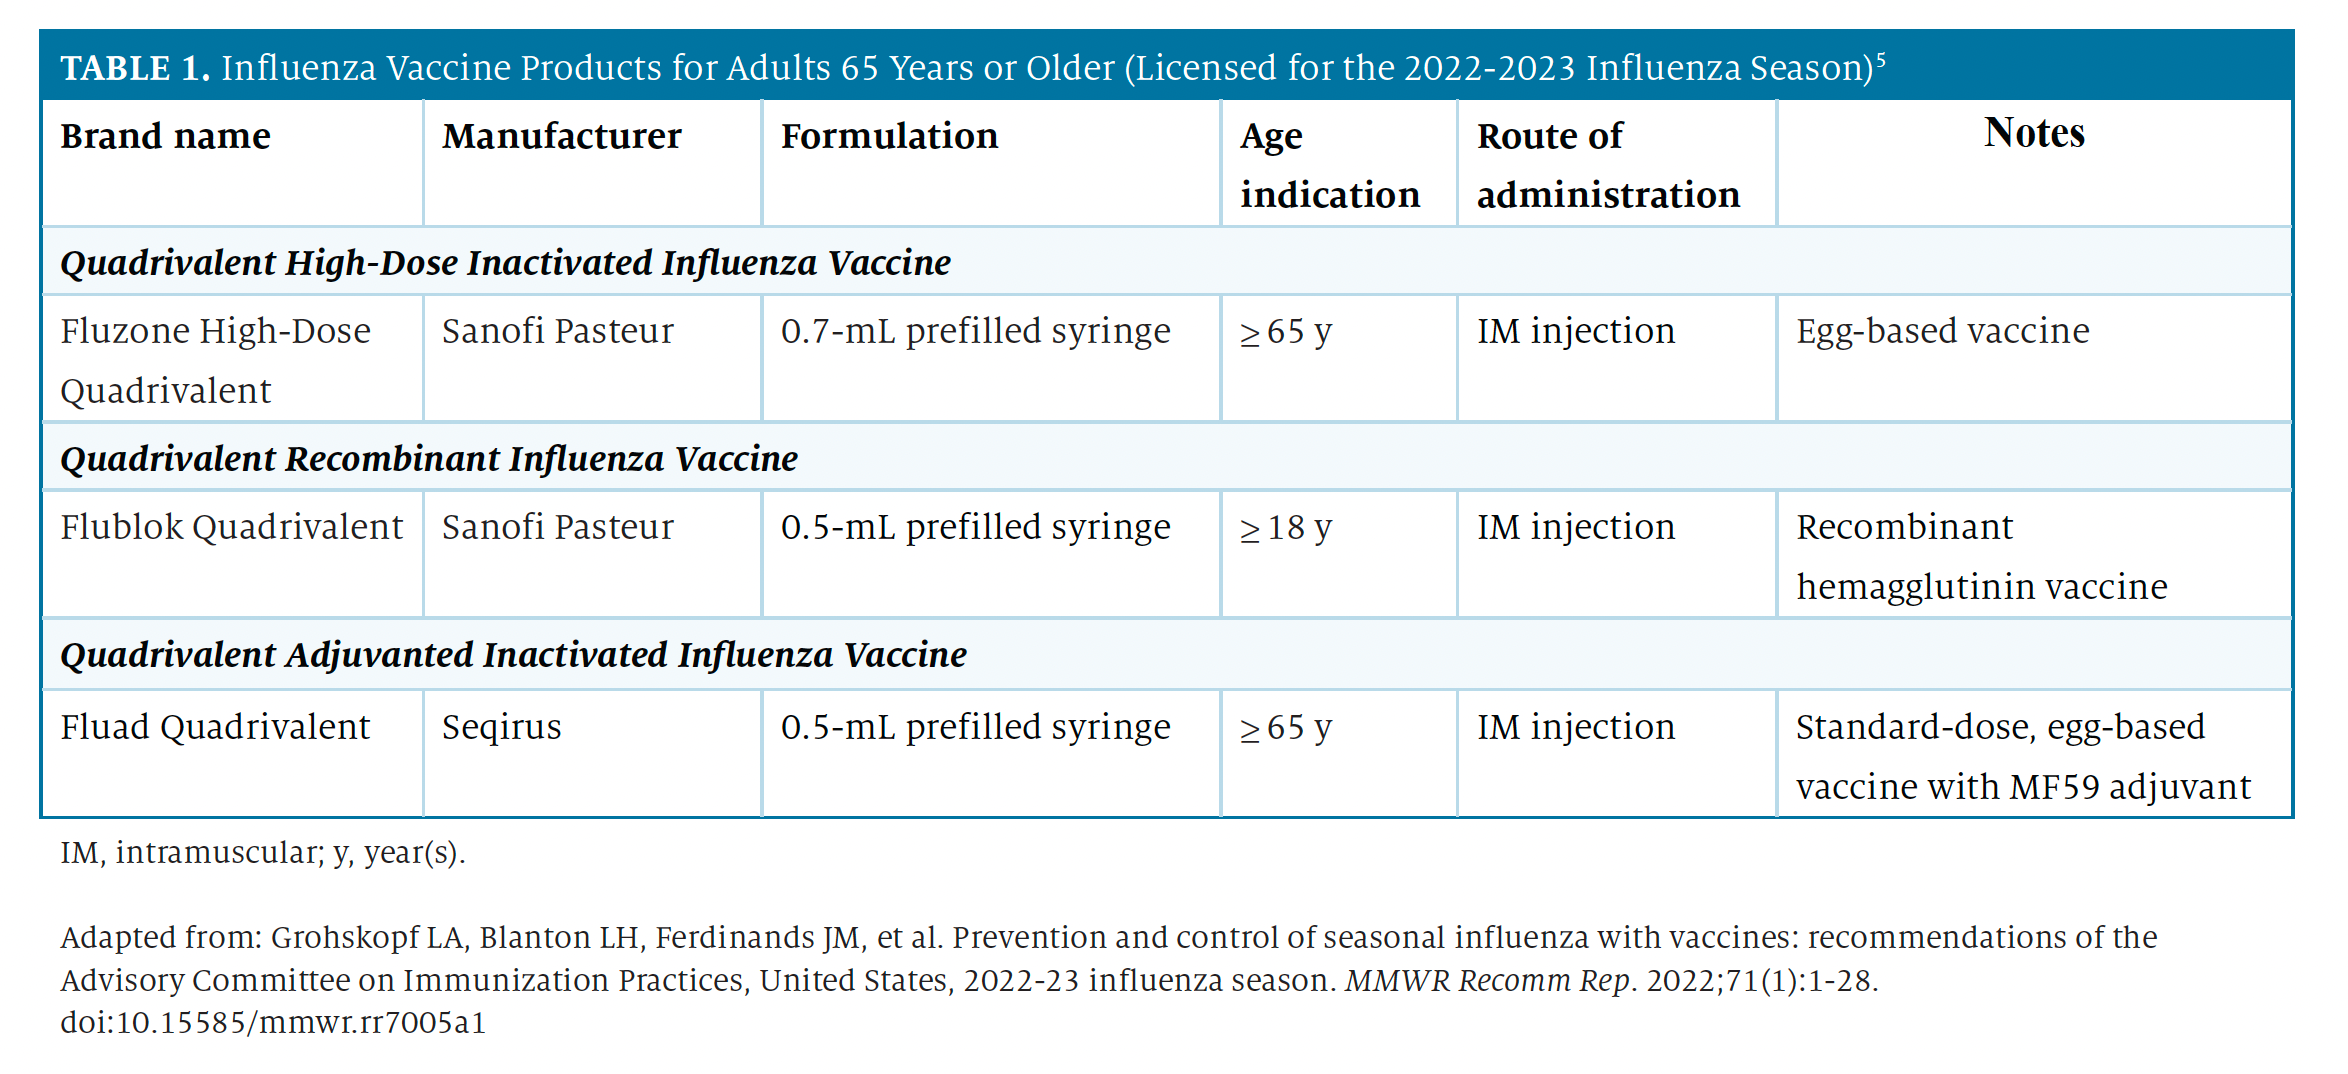 Influenza Vaccine Products for Adults 65 Years or Older (Licensed for the 2022-2023 Influenza Season)